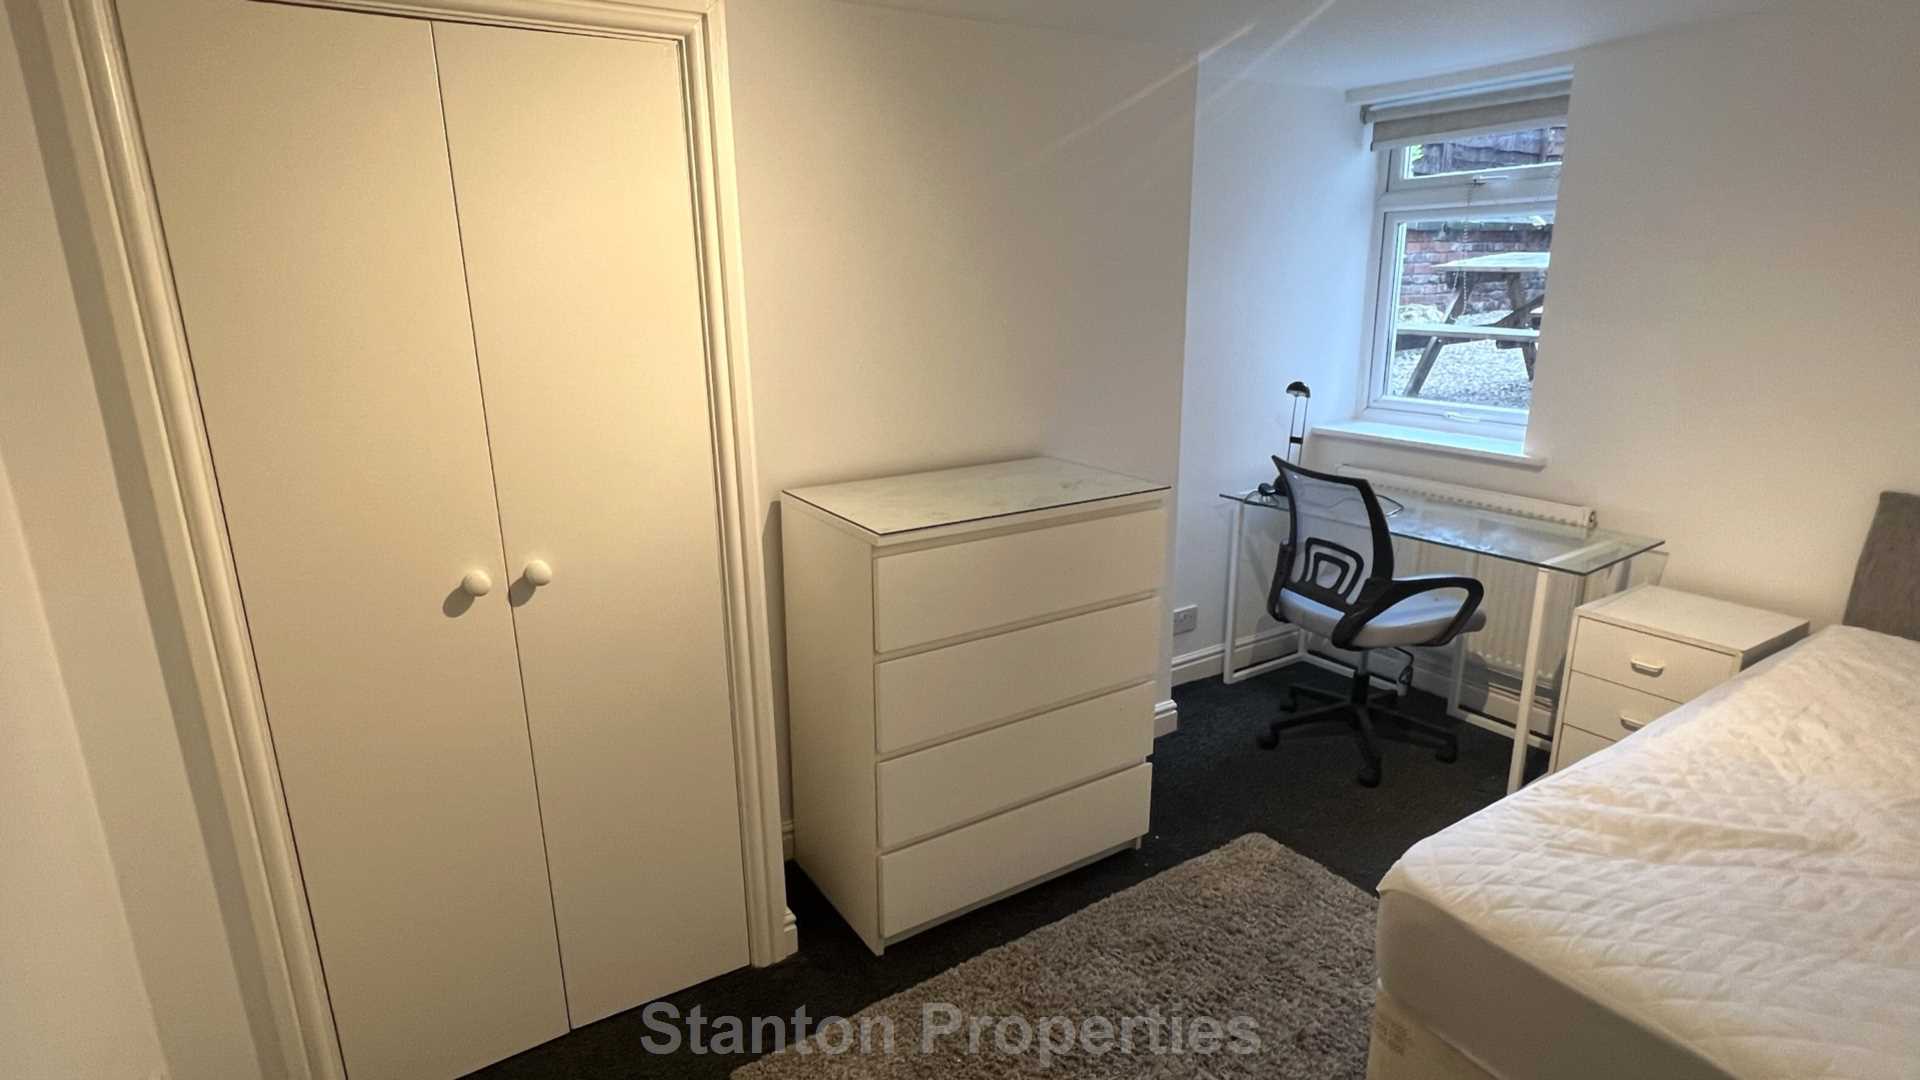 £150 PER WEEK / £650 PER MONTH, Lombard Grove, Manchester, Image 18